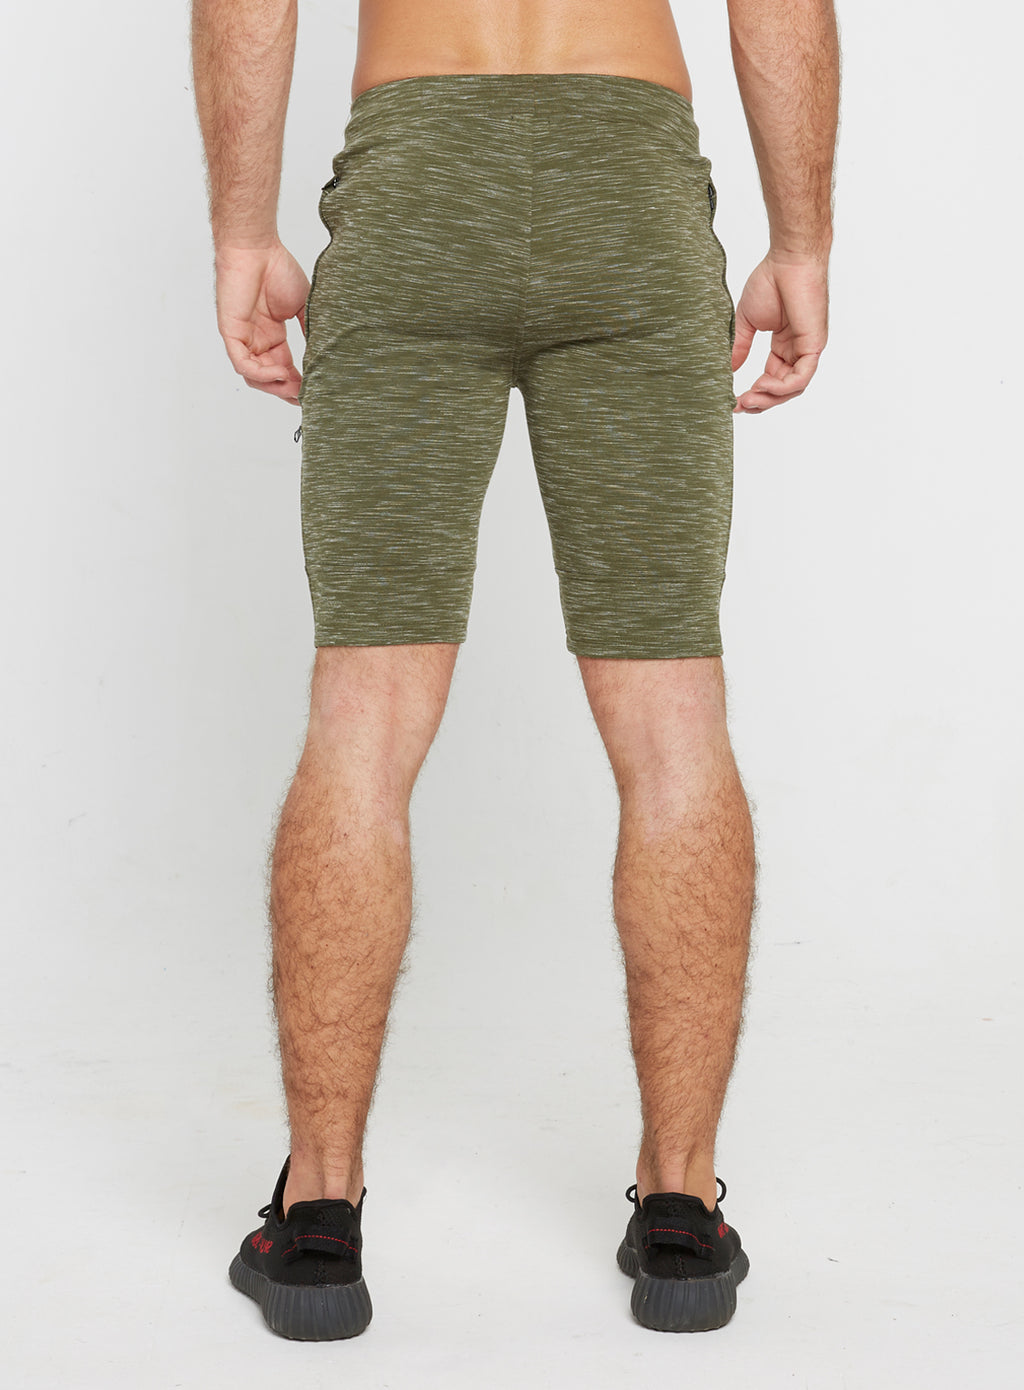 Gym Monkee - Olive Striped Shorts REAR